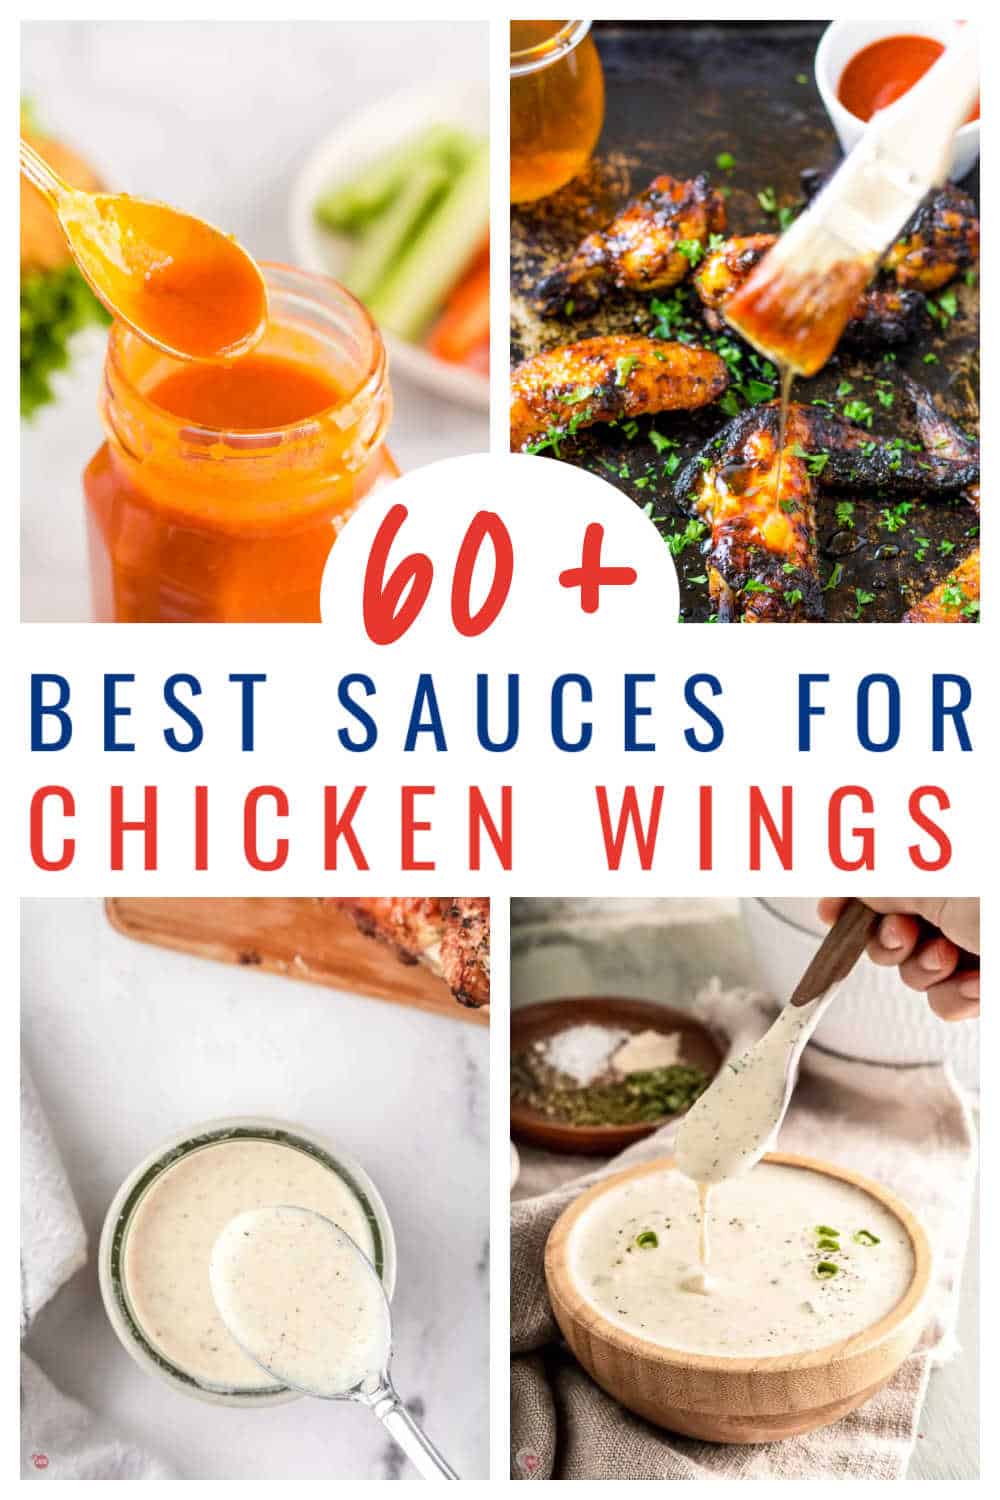 collage of 4 pictures of sauces with text "60+ best chicken wing sauces"